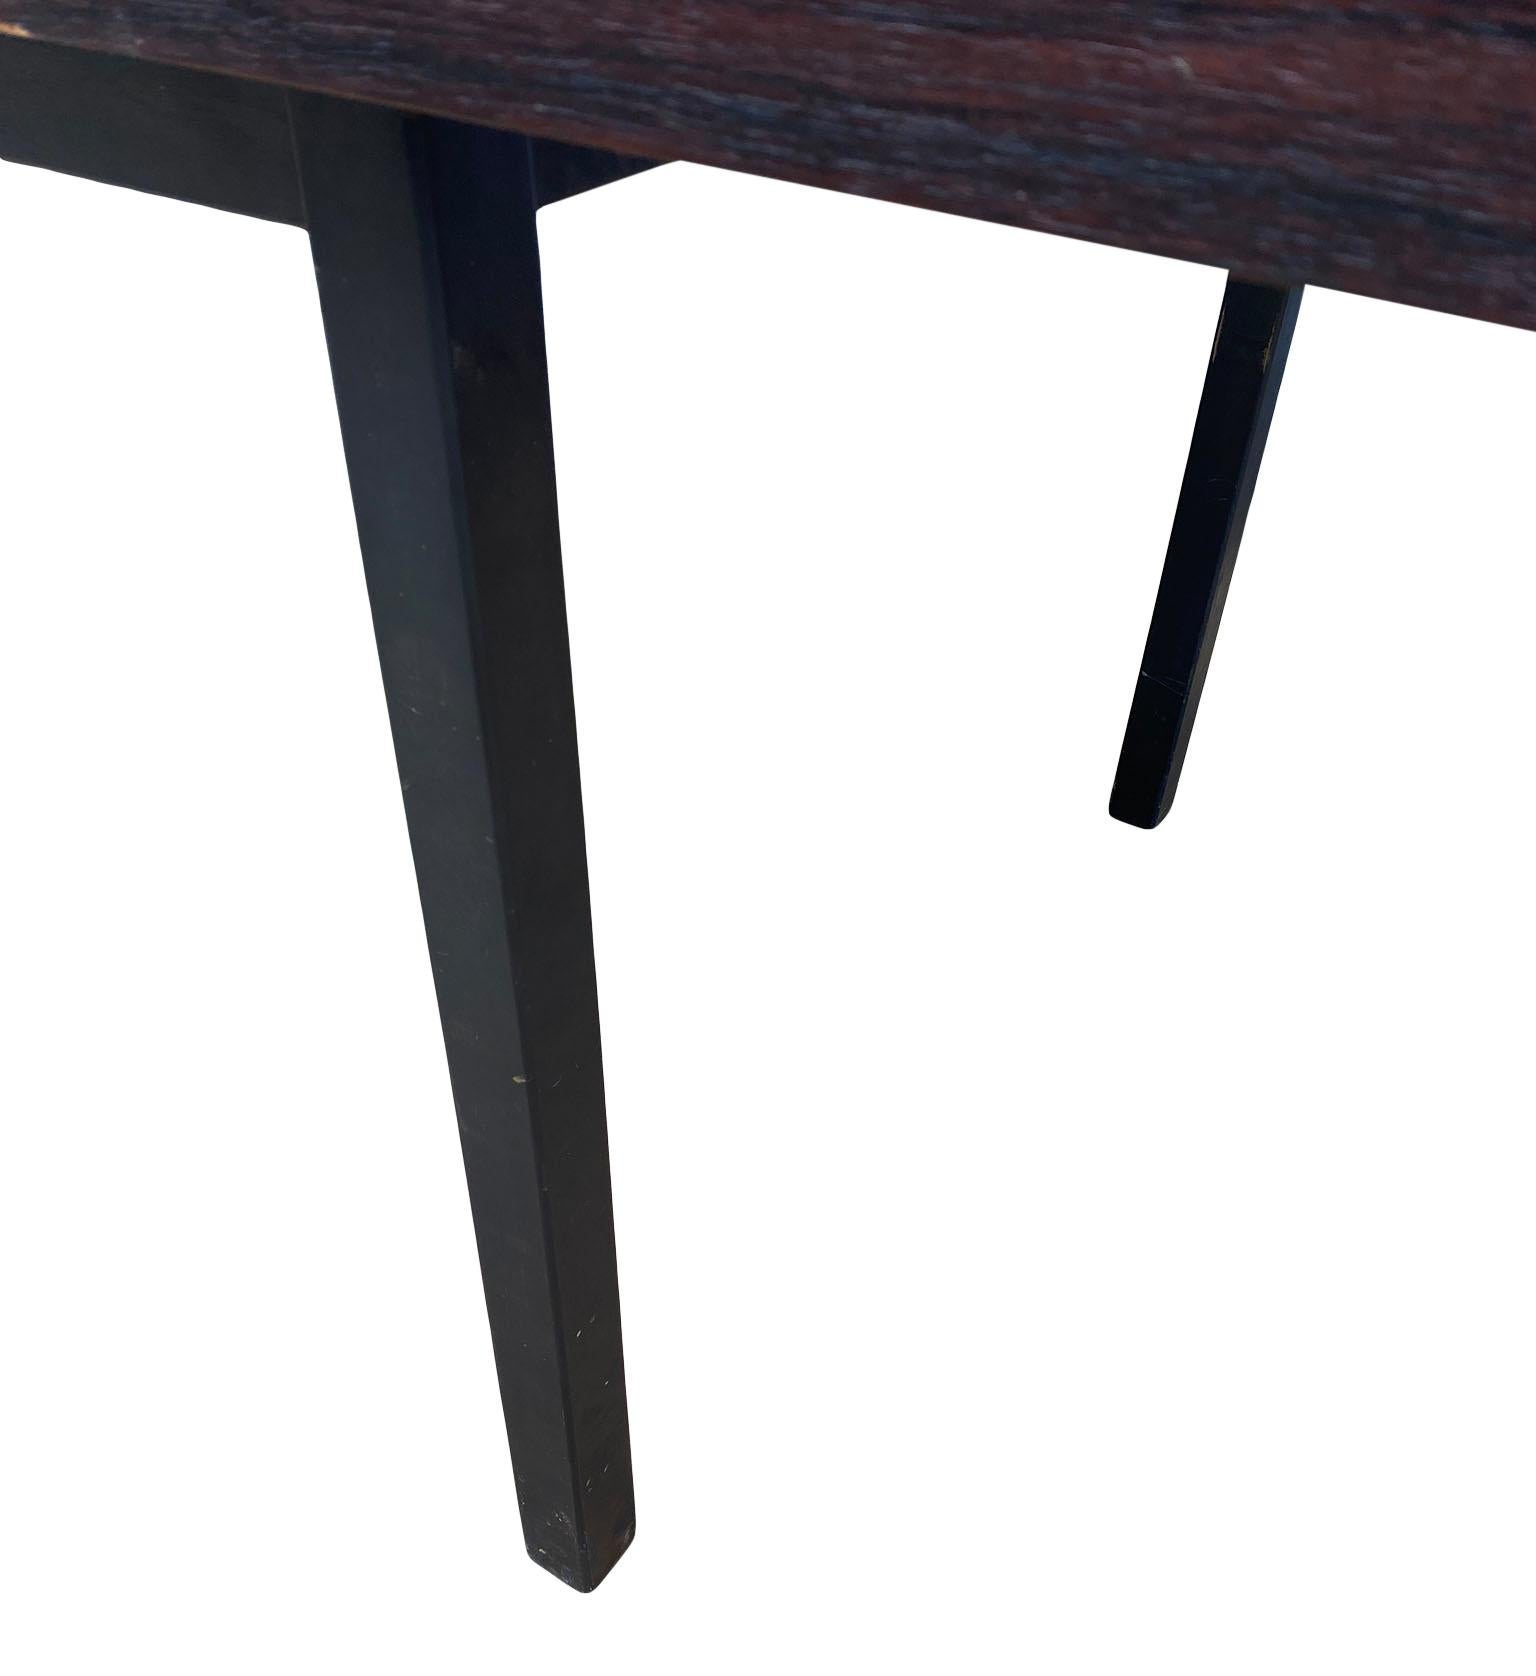 Rosewood Midcentury Tri-Wood Expandable Dining Table by Milo Baughman with '2' Leaves